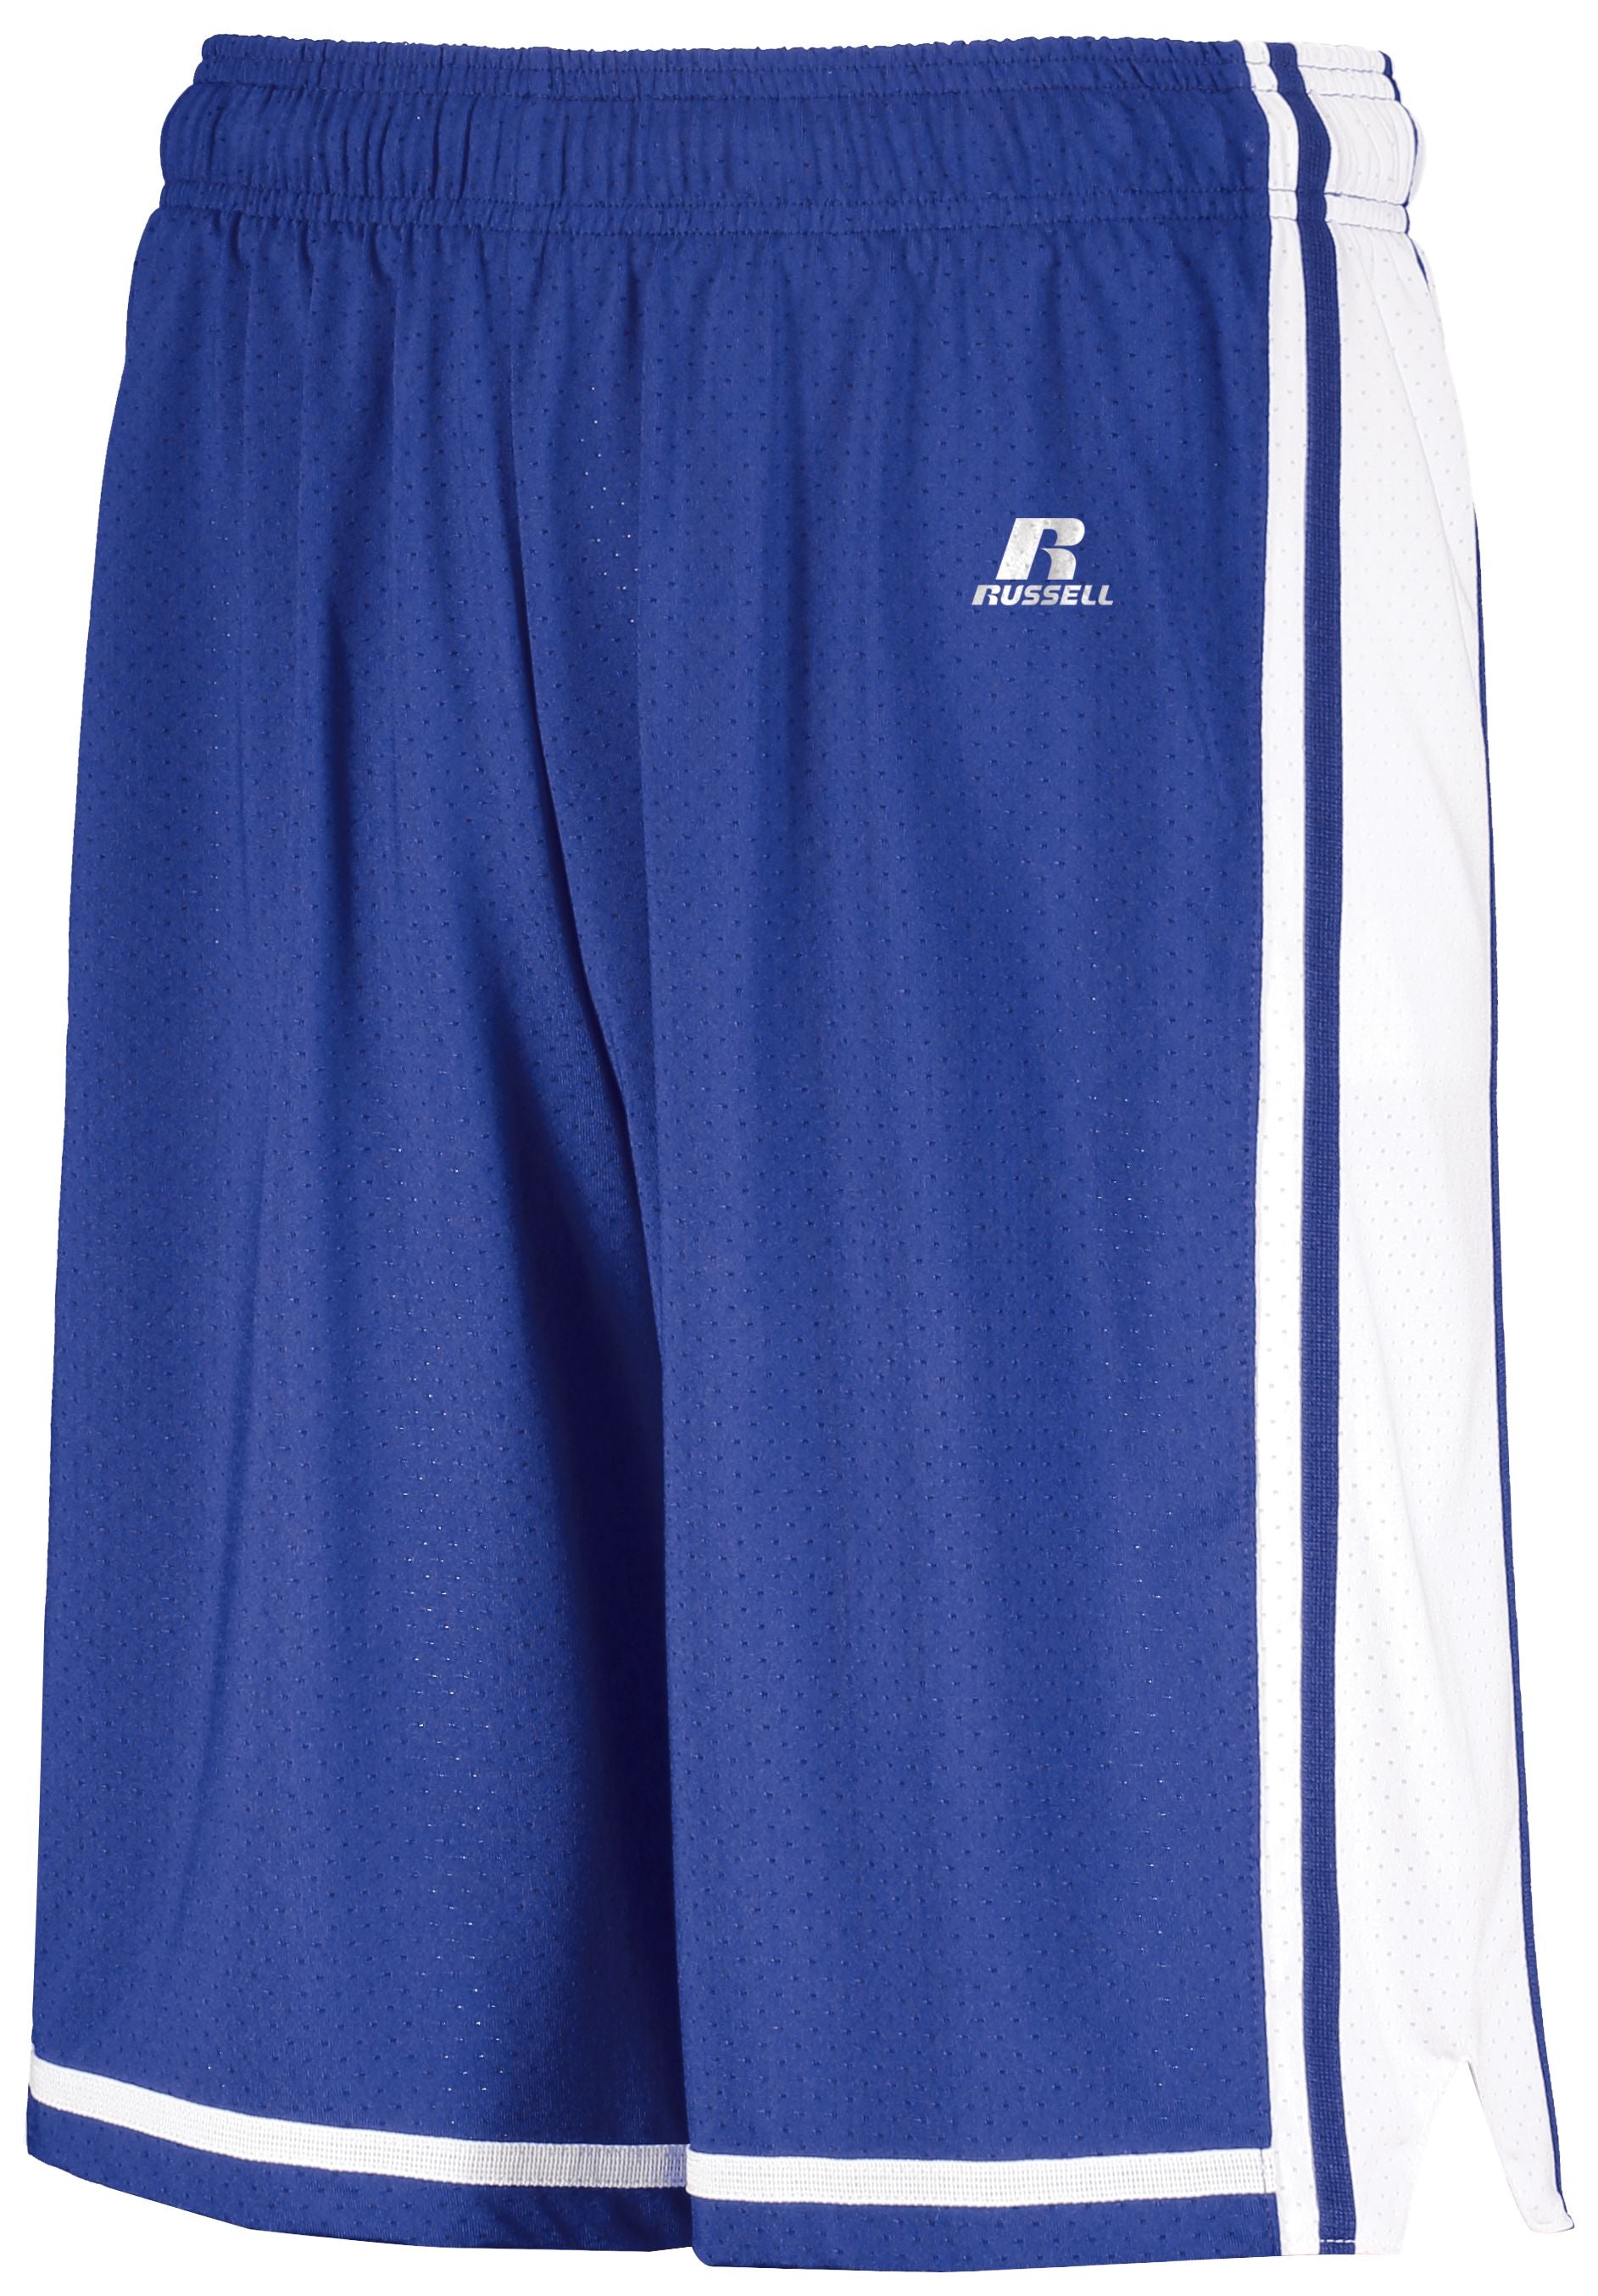 Russell Athletic Youth Legacy Basketball Shorts in Royal/White  -Part of the Youth, Youth-Shorts, Basketball, Russell-Athletic-Products, All-Sports, All-Sports-1 product lines at KanaleyCreations.com